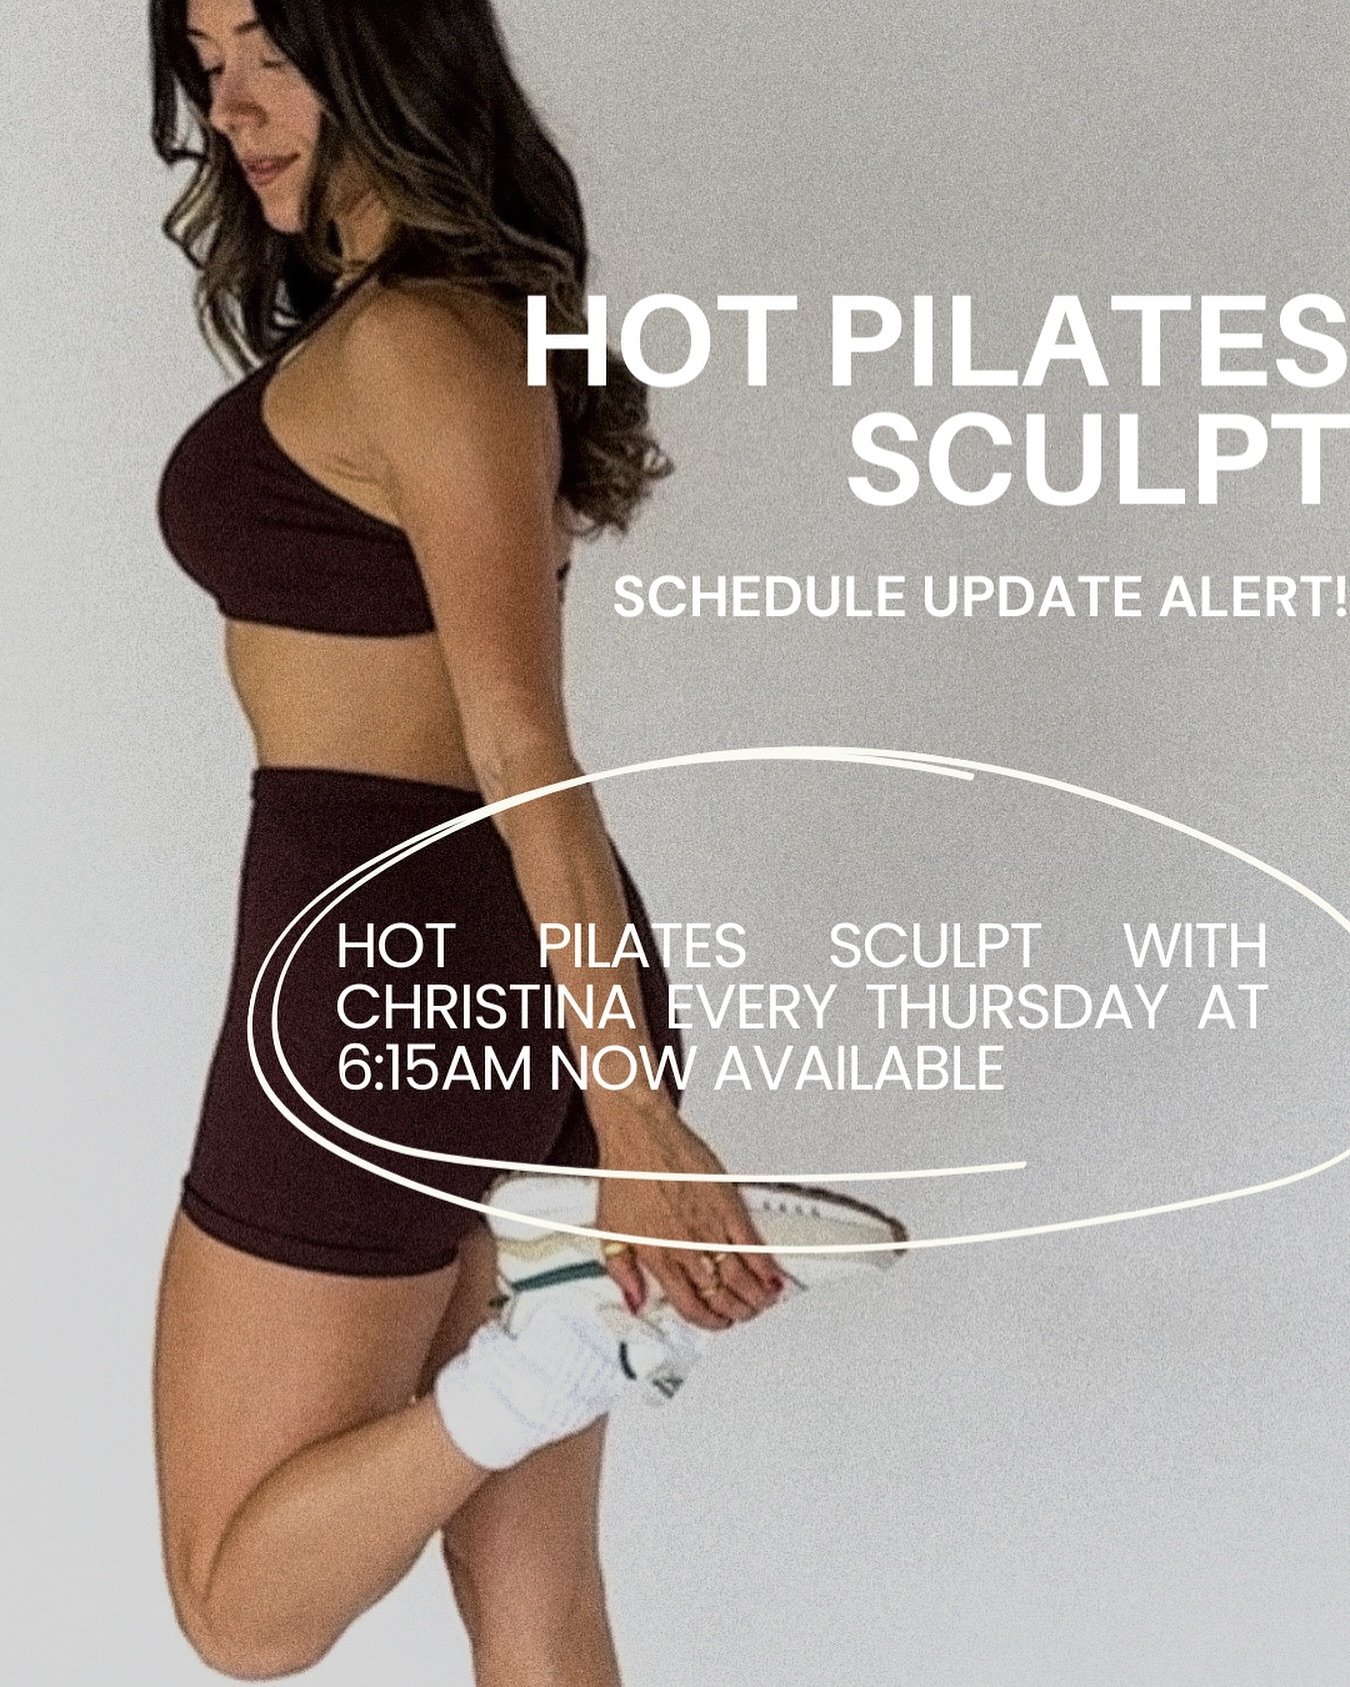 🚨Schedule update!🚨

Catch Christina at 6:15AMs every Thursday morning!🔥🍑✨#hotpilatesscuplt